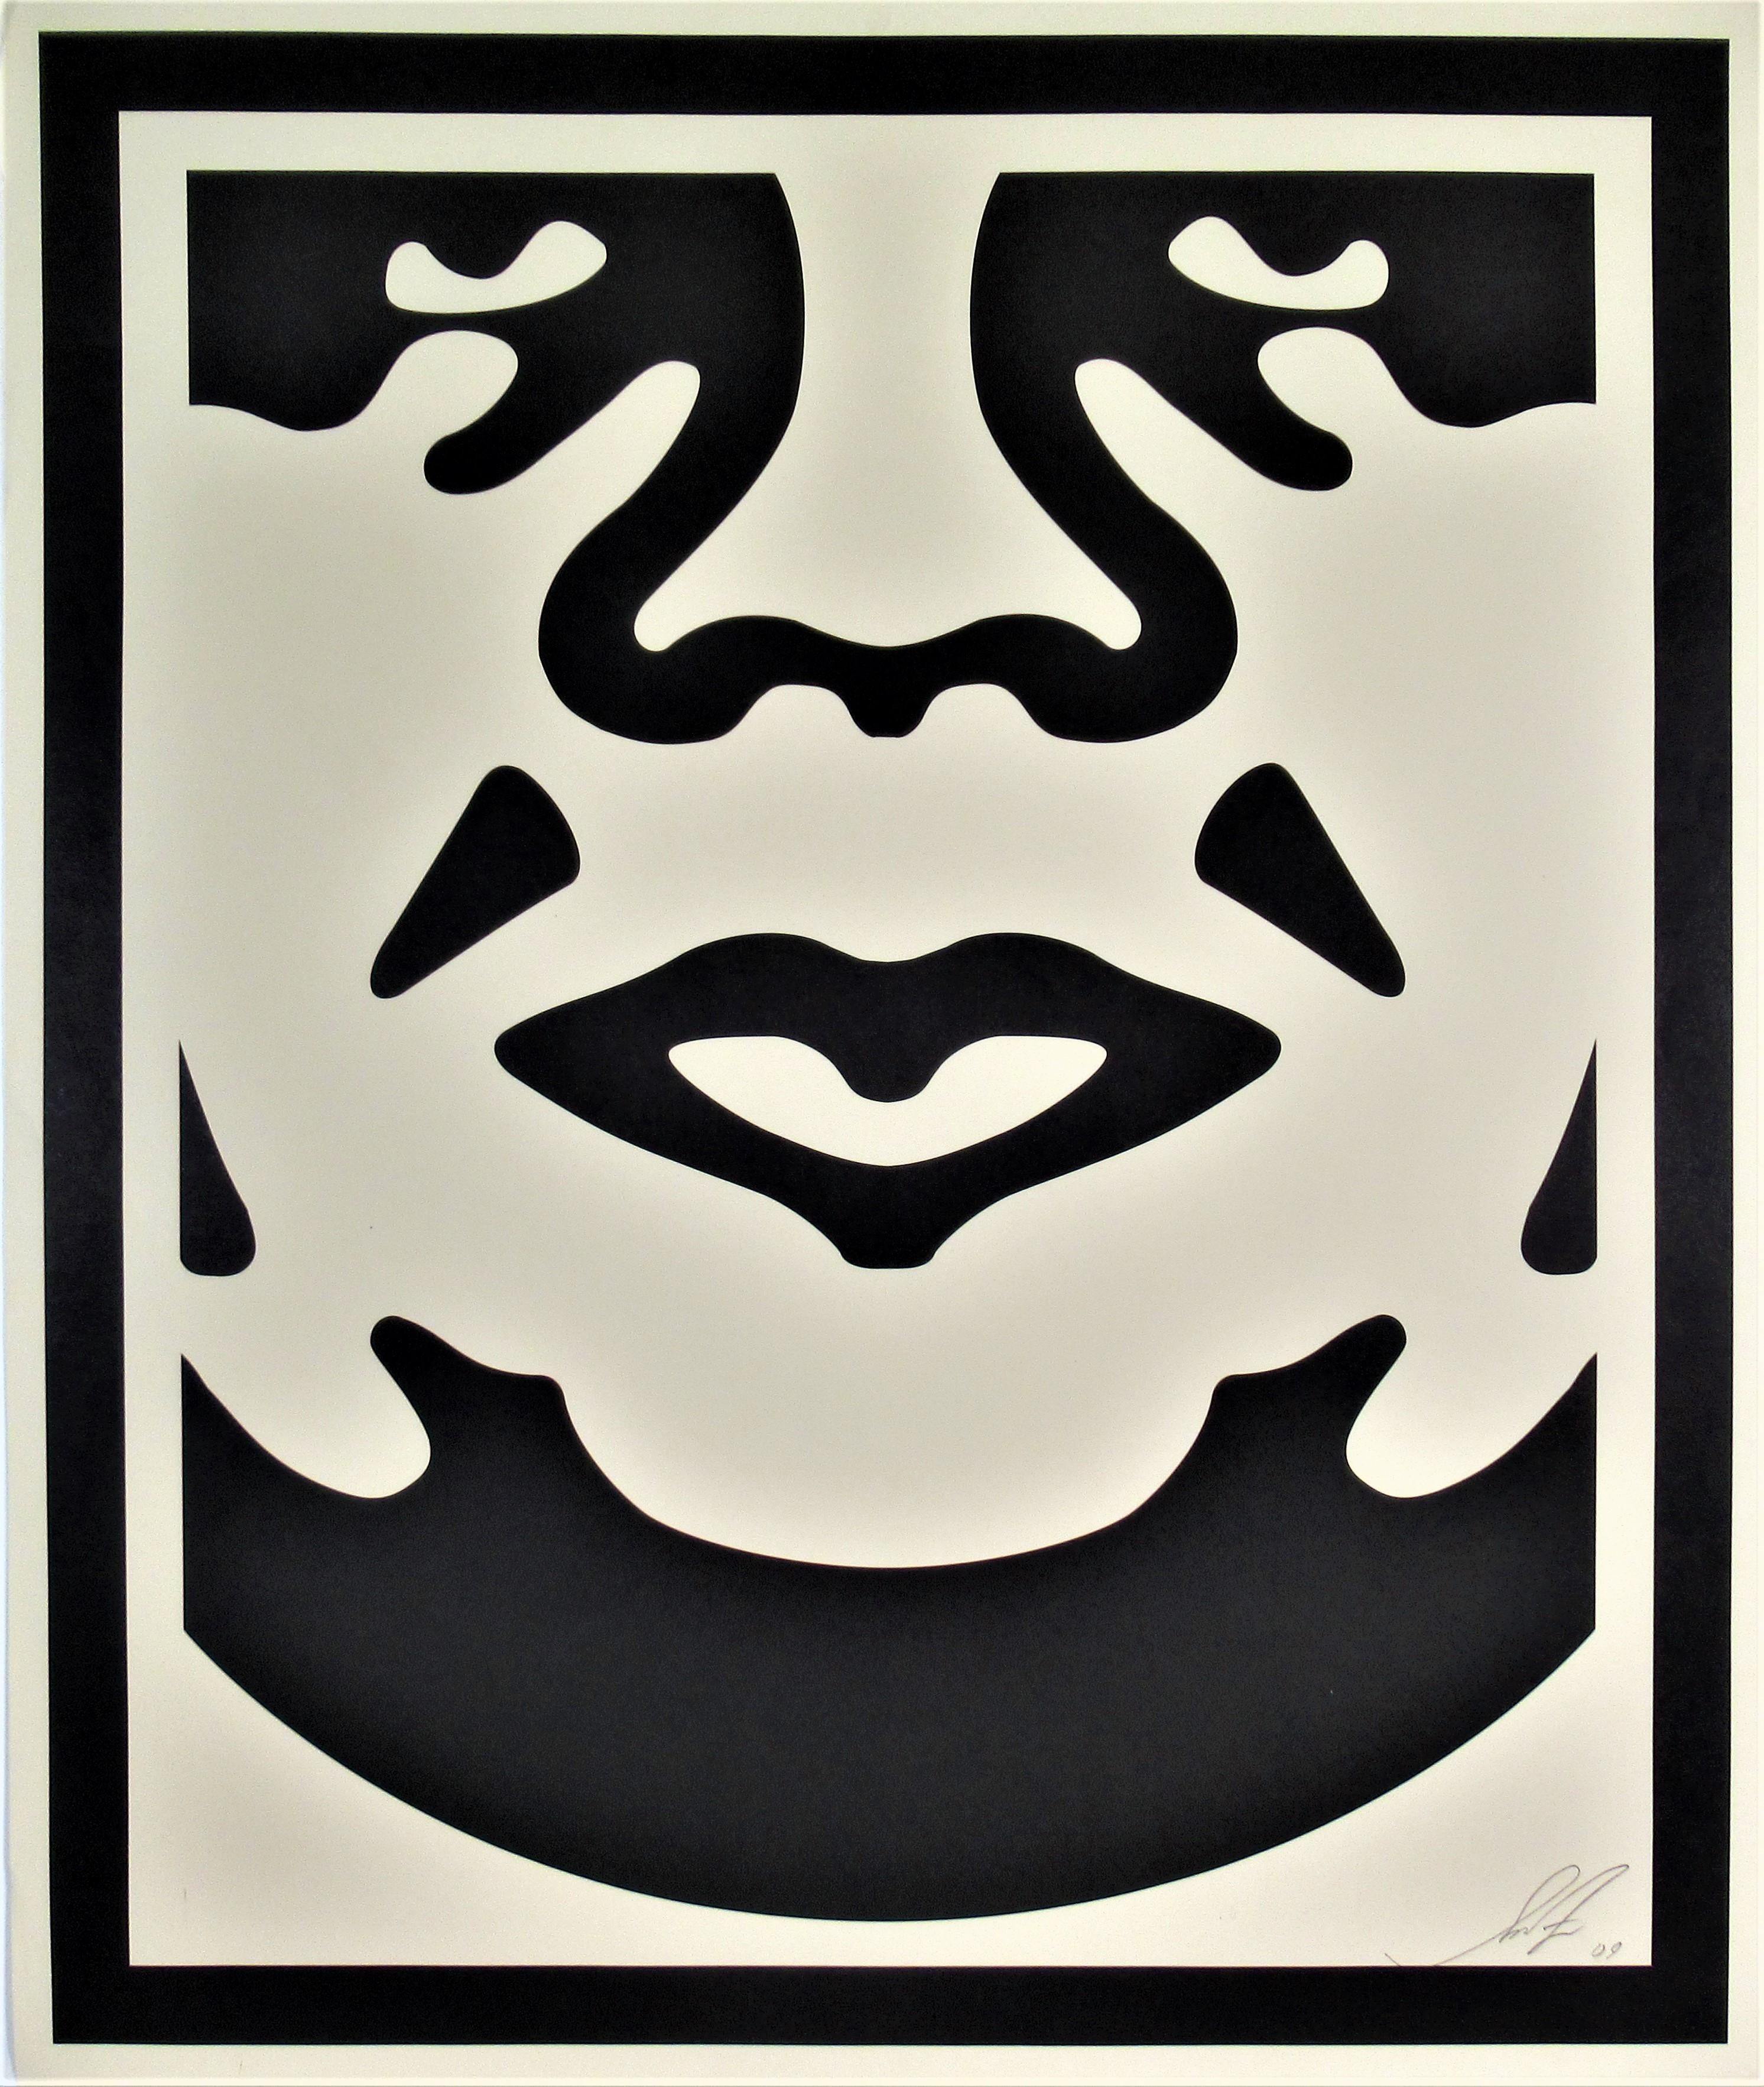 andre the giant obey logo